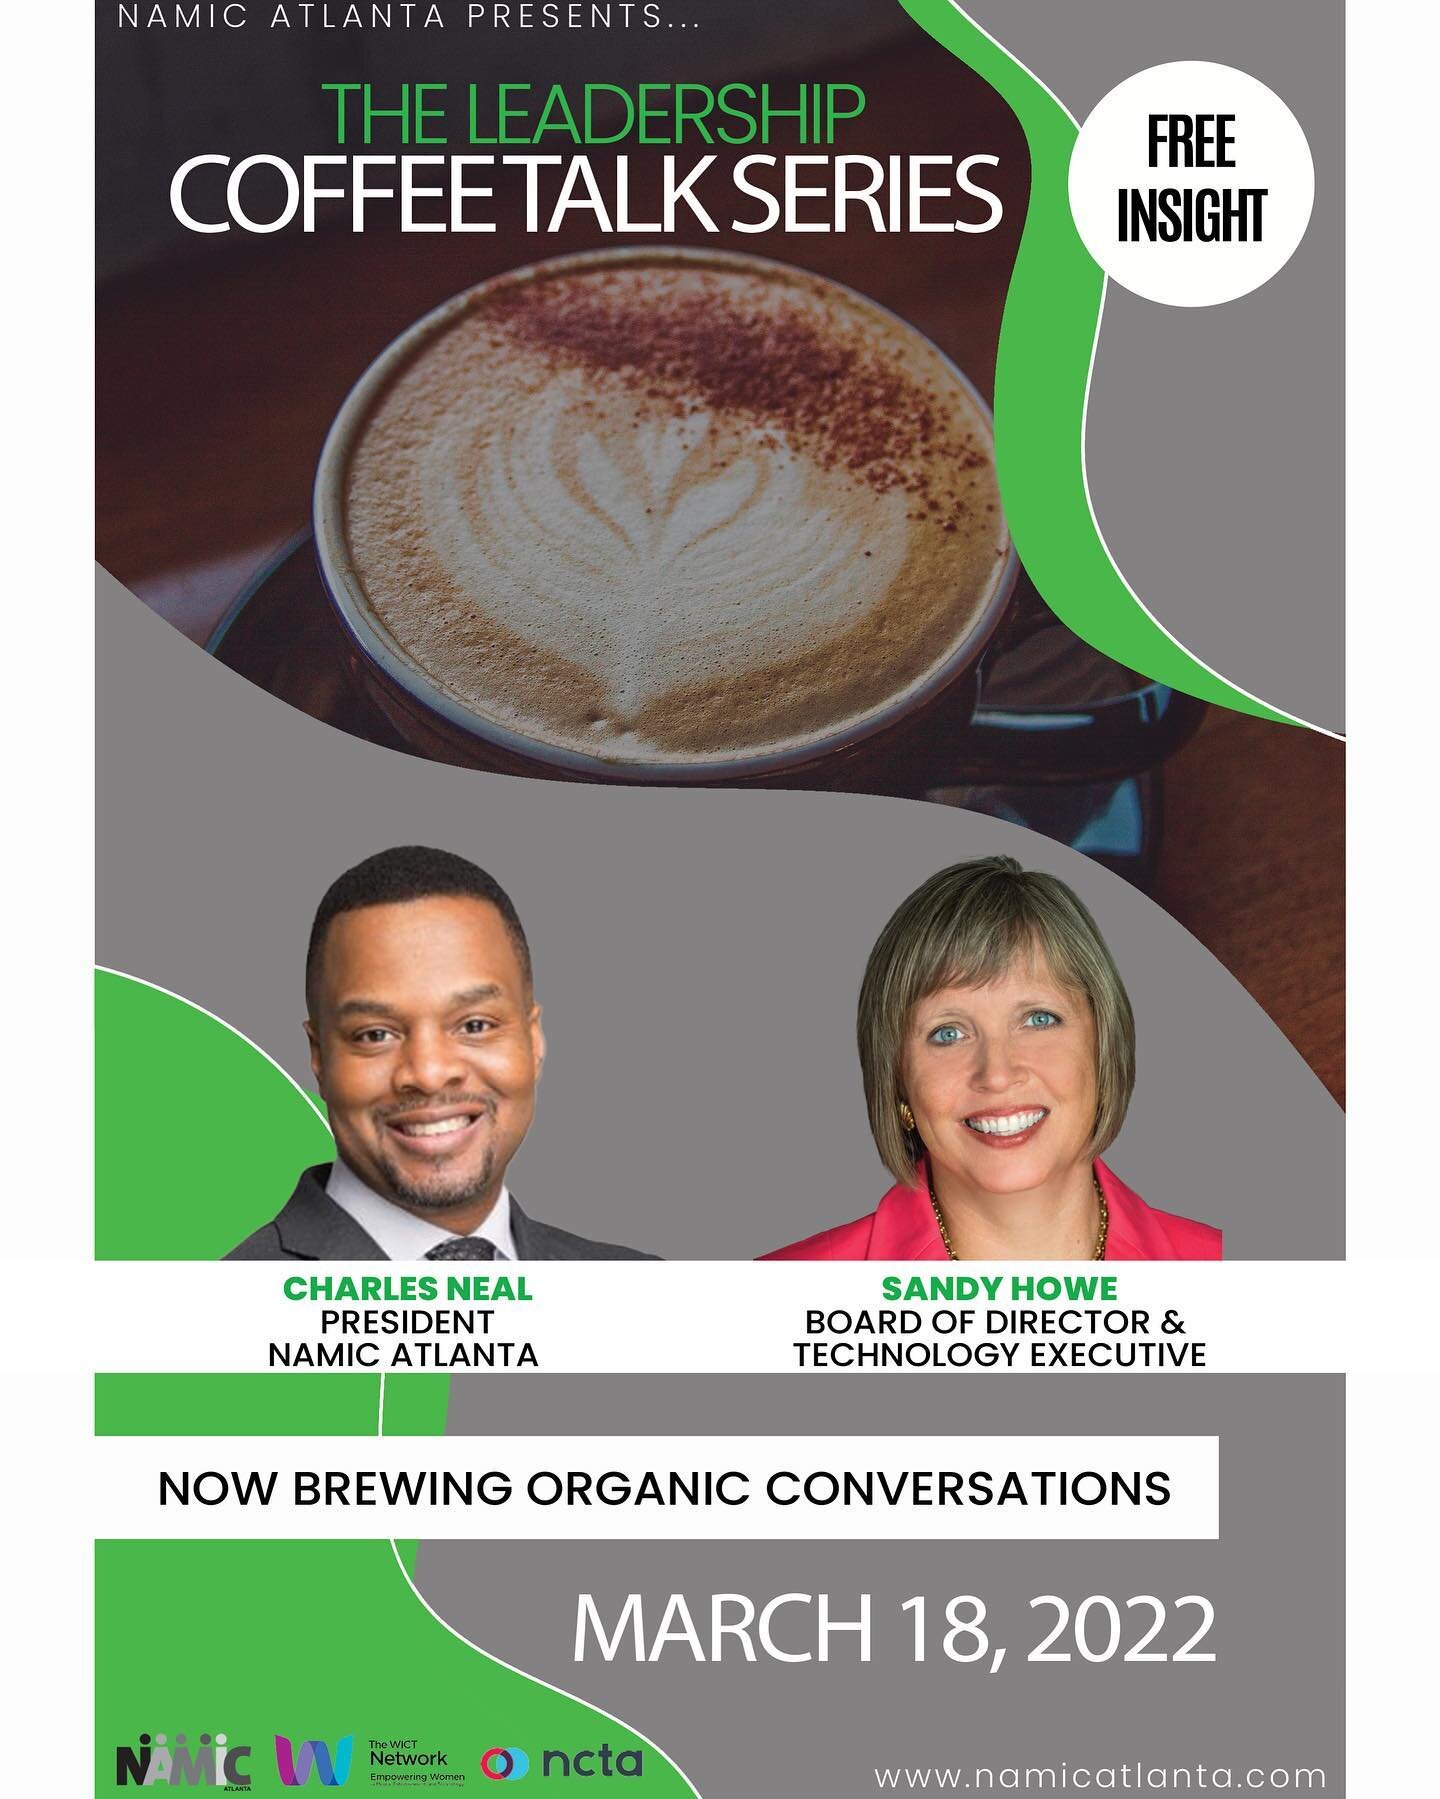 Now Playing: https://lnkd.in/edu3sNrK

NAMIC Atlanta is happy to share our 1st Coffee Talk of 2022 featuring Sandra K. Howe (Board Director and Technology Executive) and Charles Neal PMP, CSM.&nbsp;Sandy brings so much knowledge, experience and posit